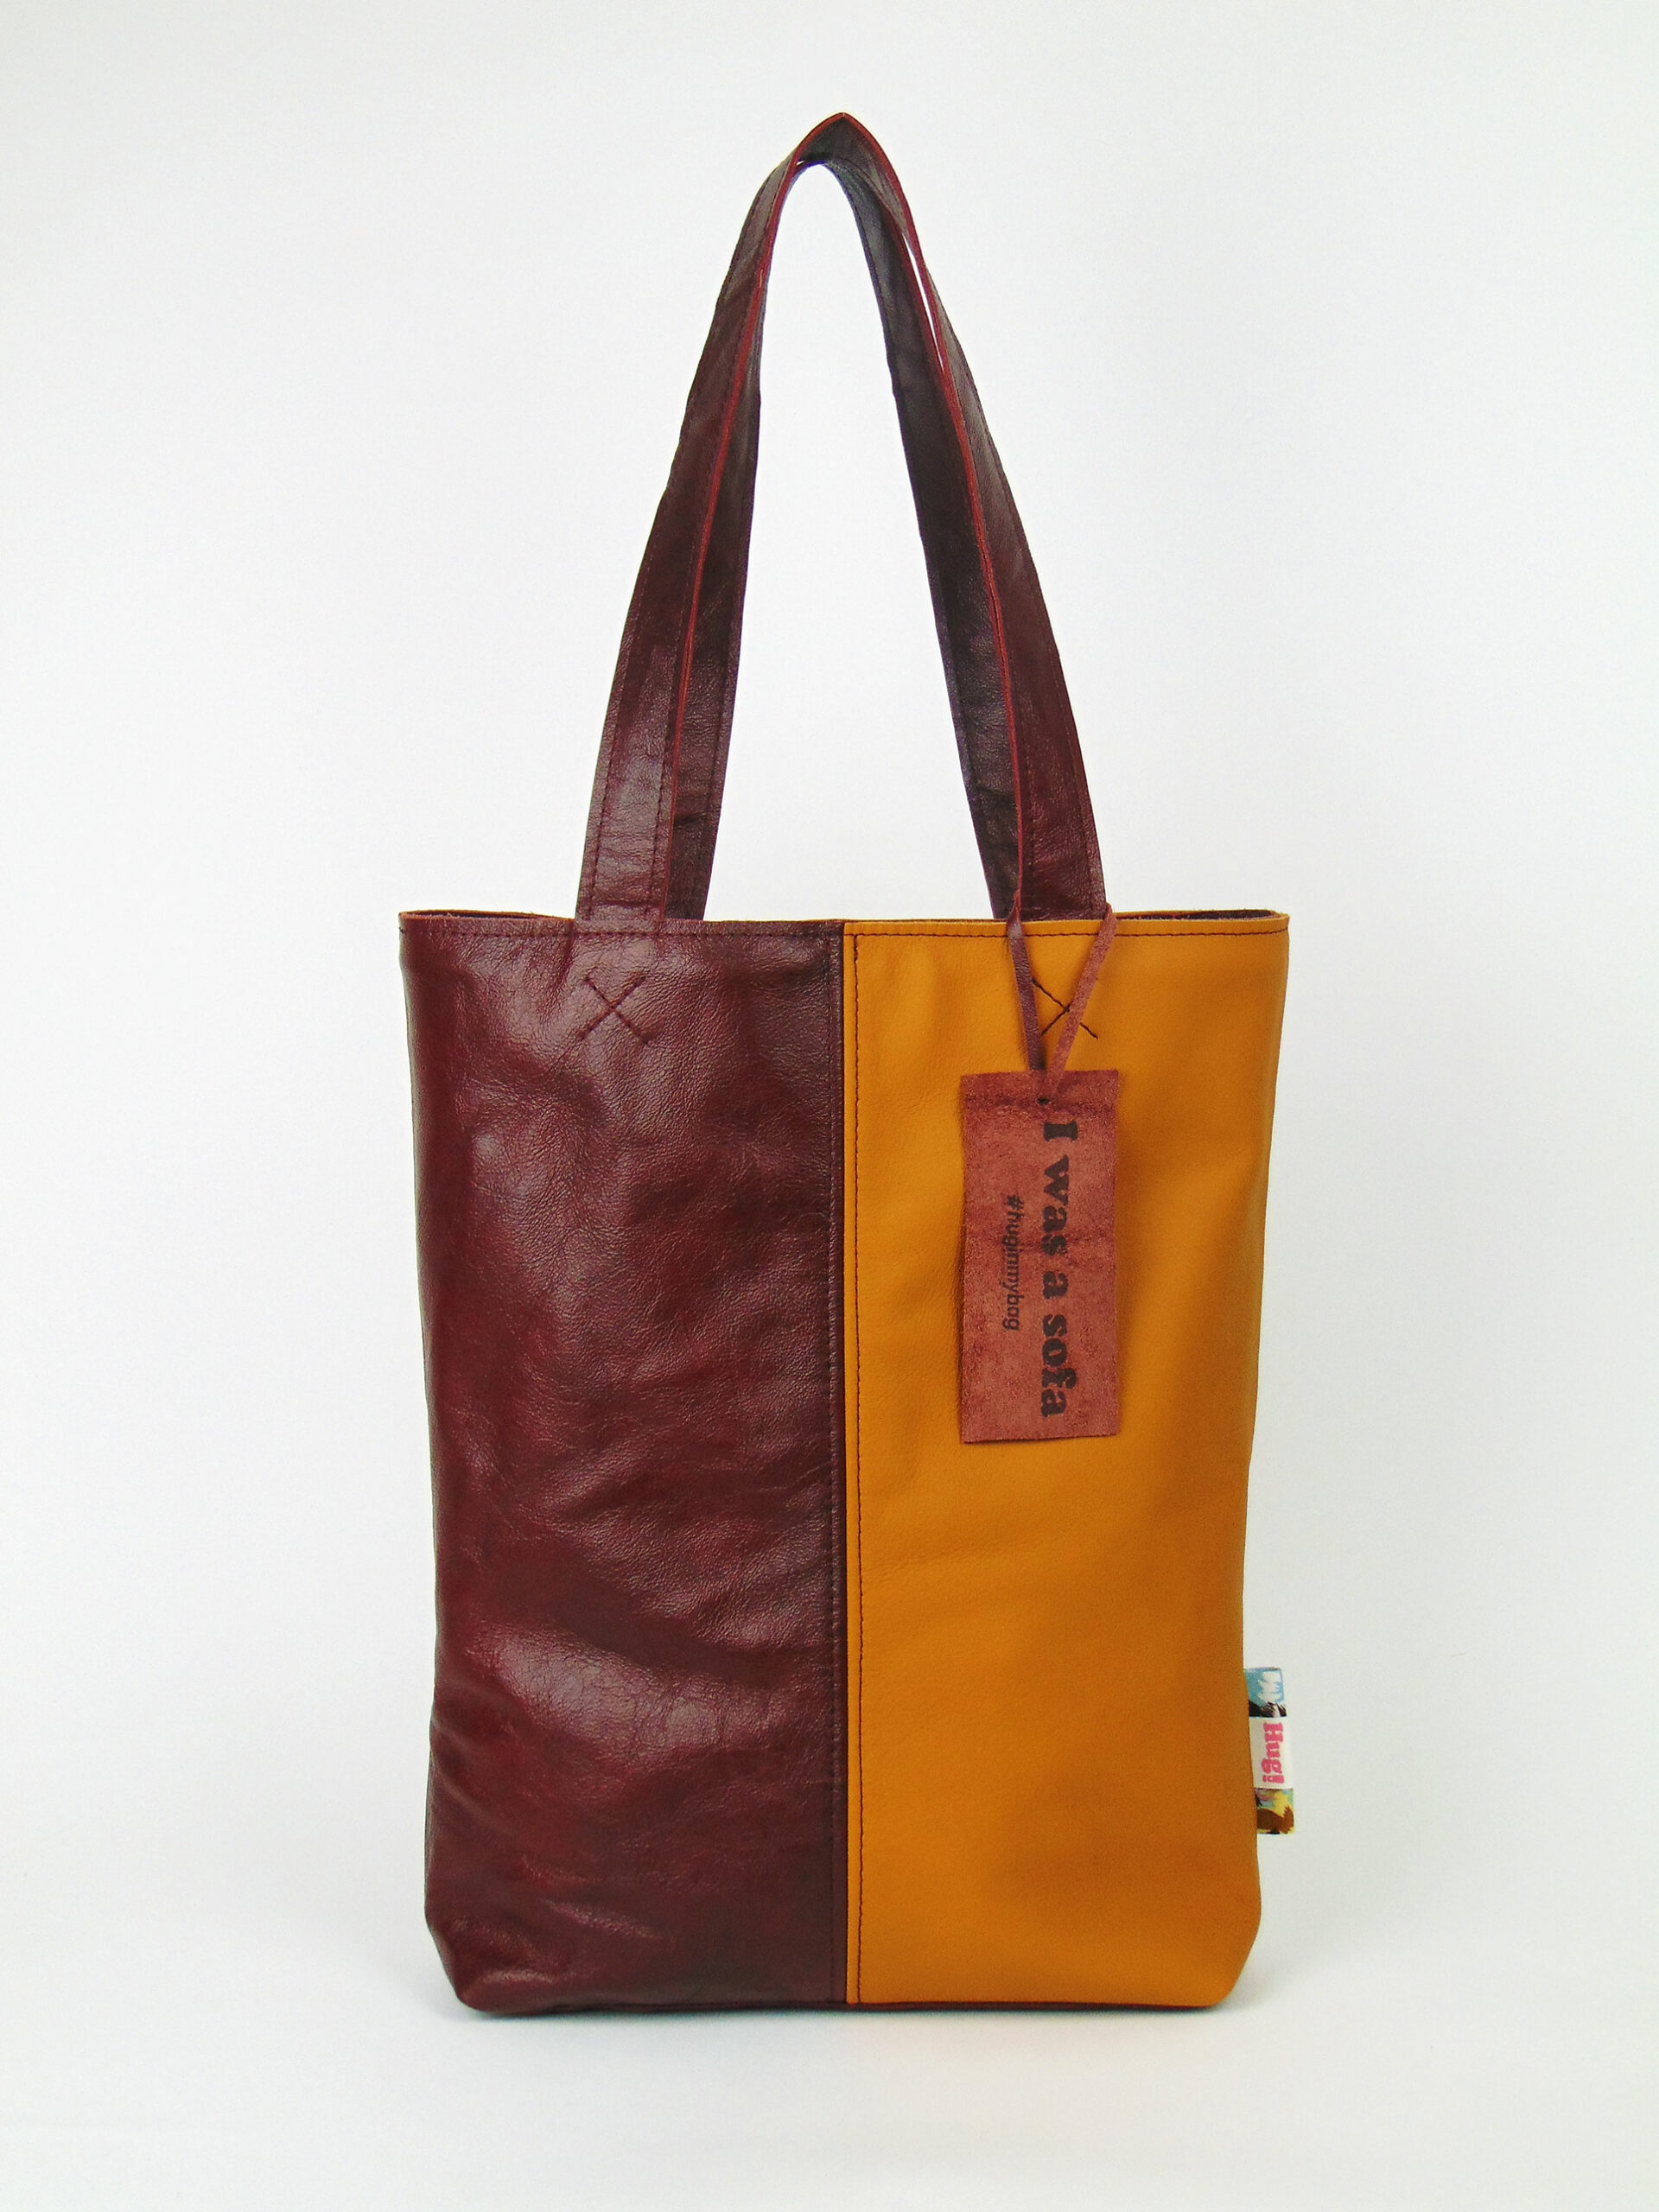 Product image of the shopper named Disco Inferno. This shopper is made from recycled leather in a colour combination of redbrown and yellow.